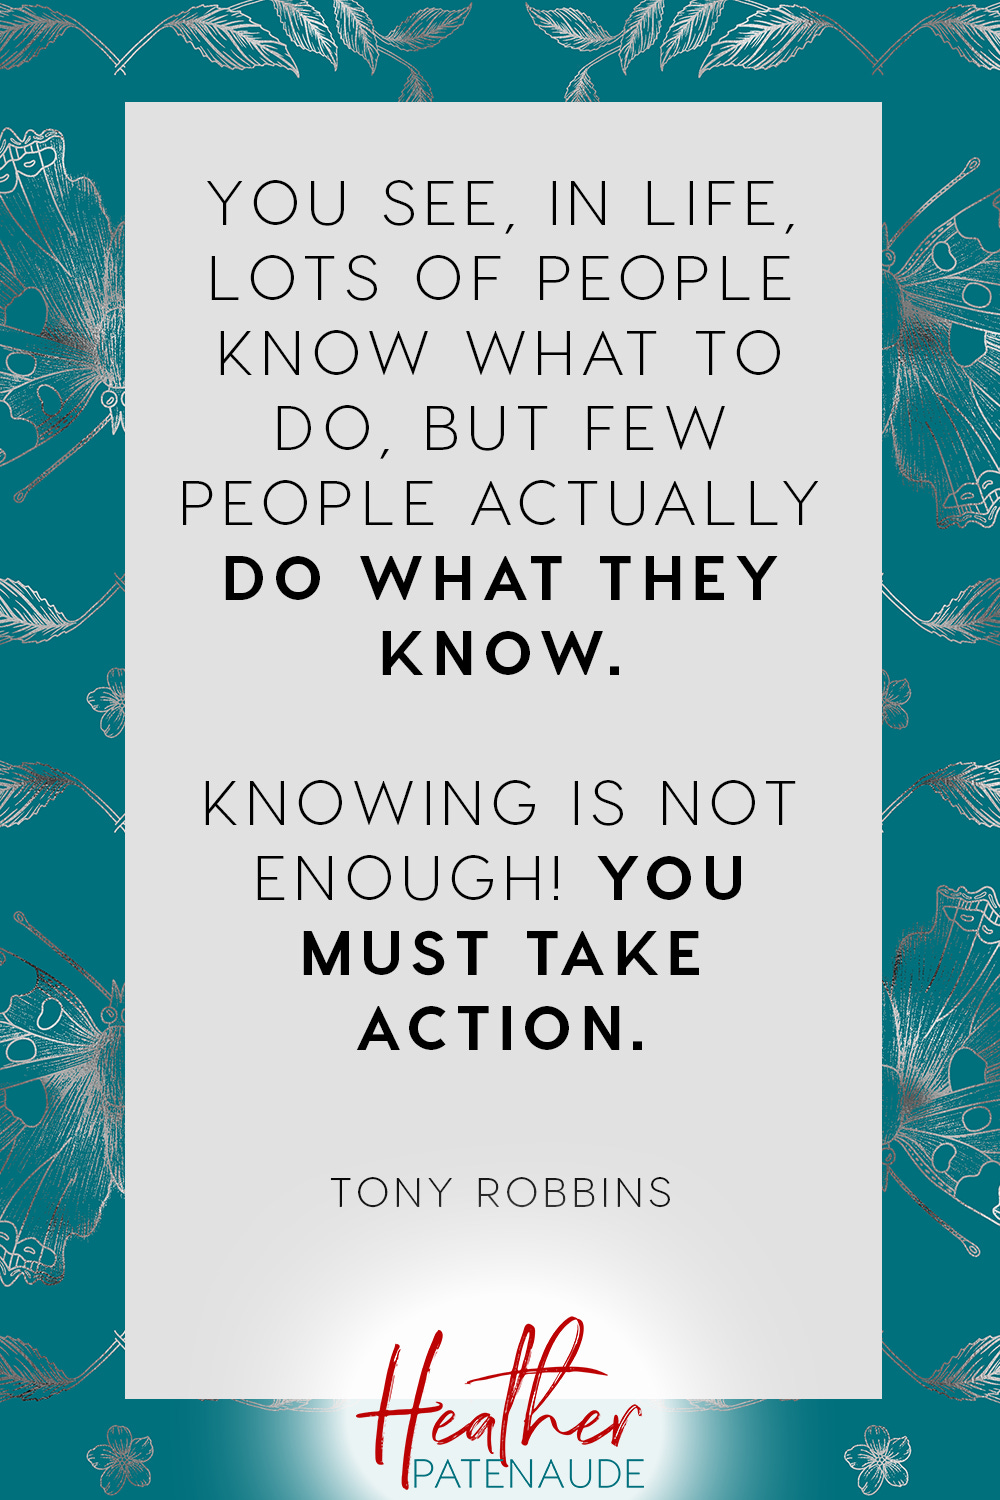 Take ACTION! | Encouragement quotes, Business quotes, Quotes